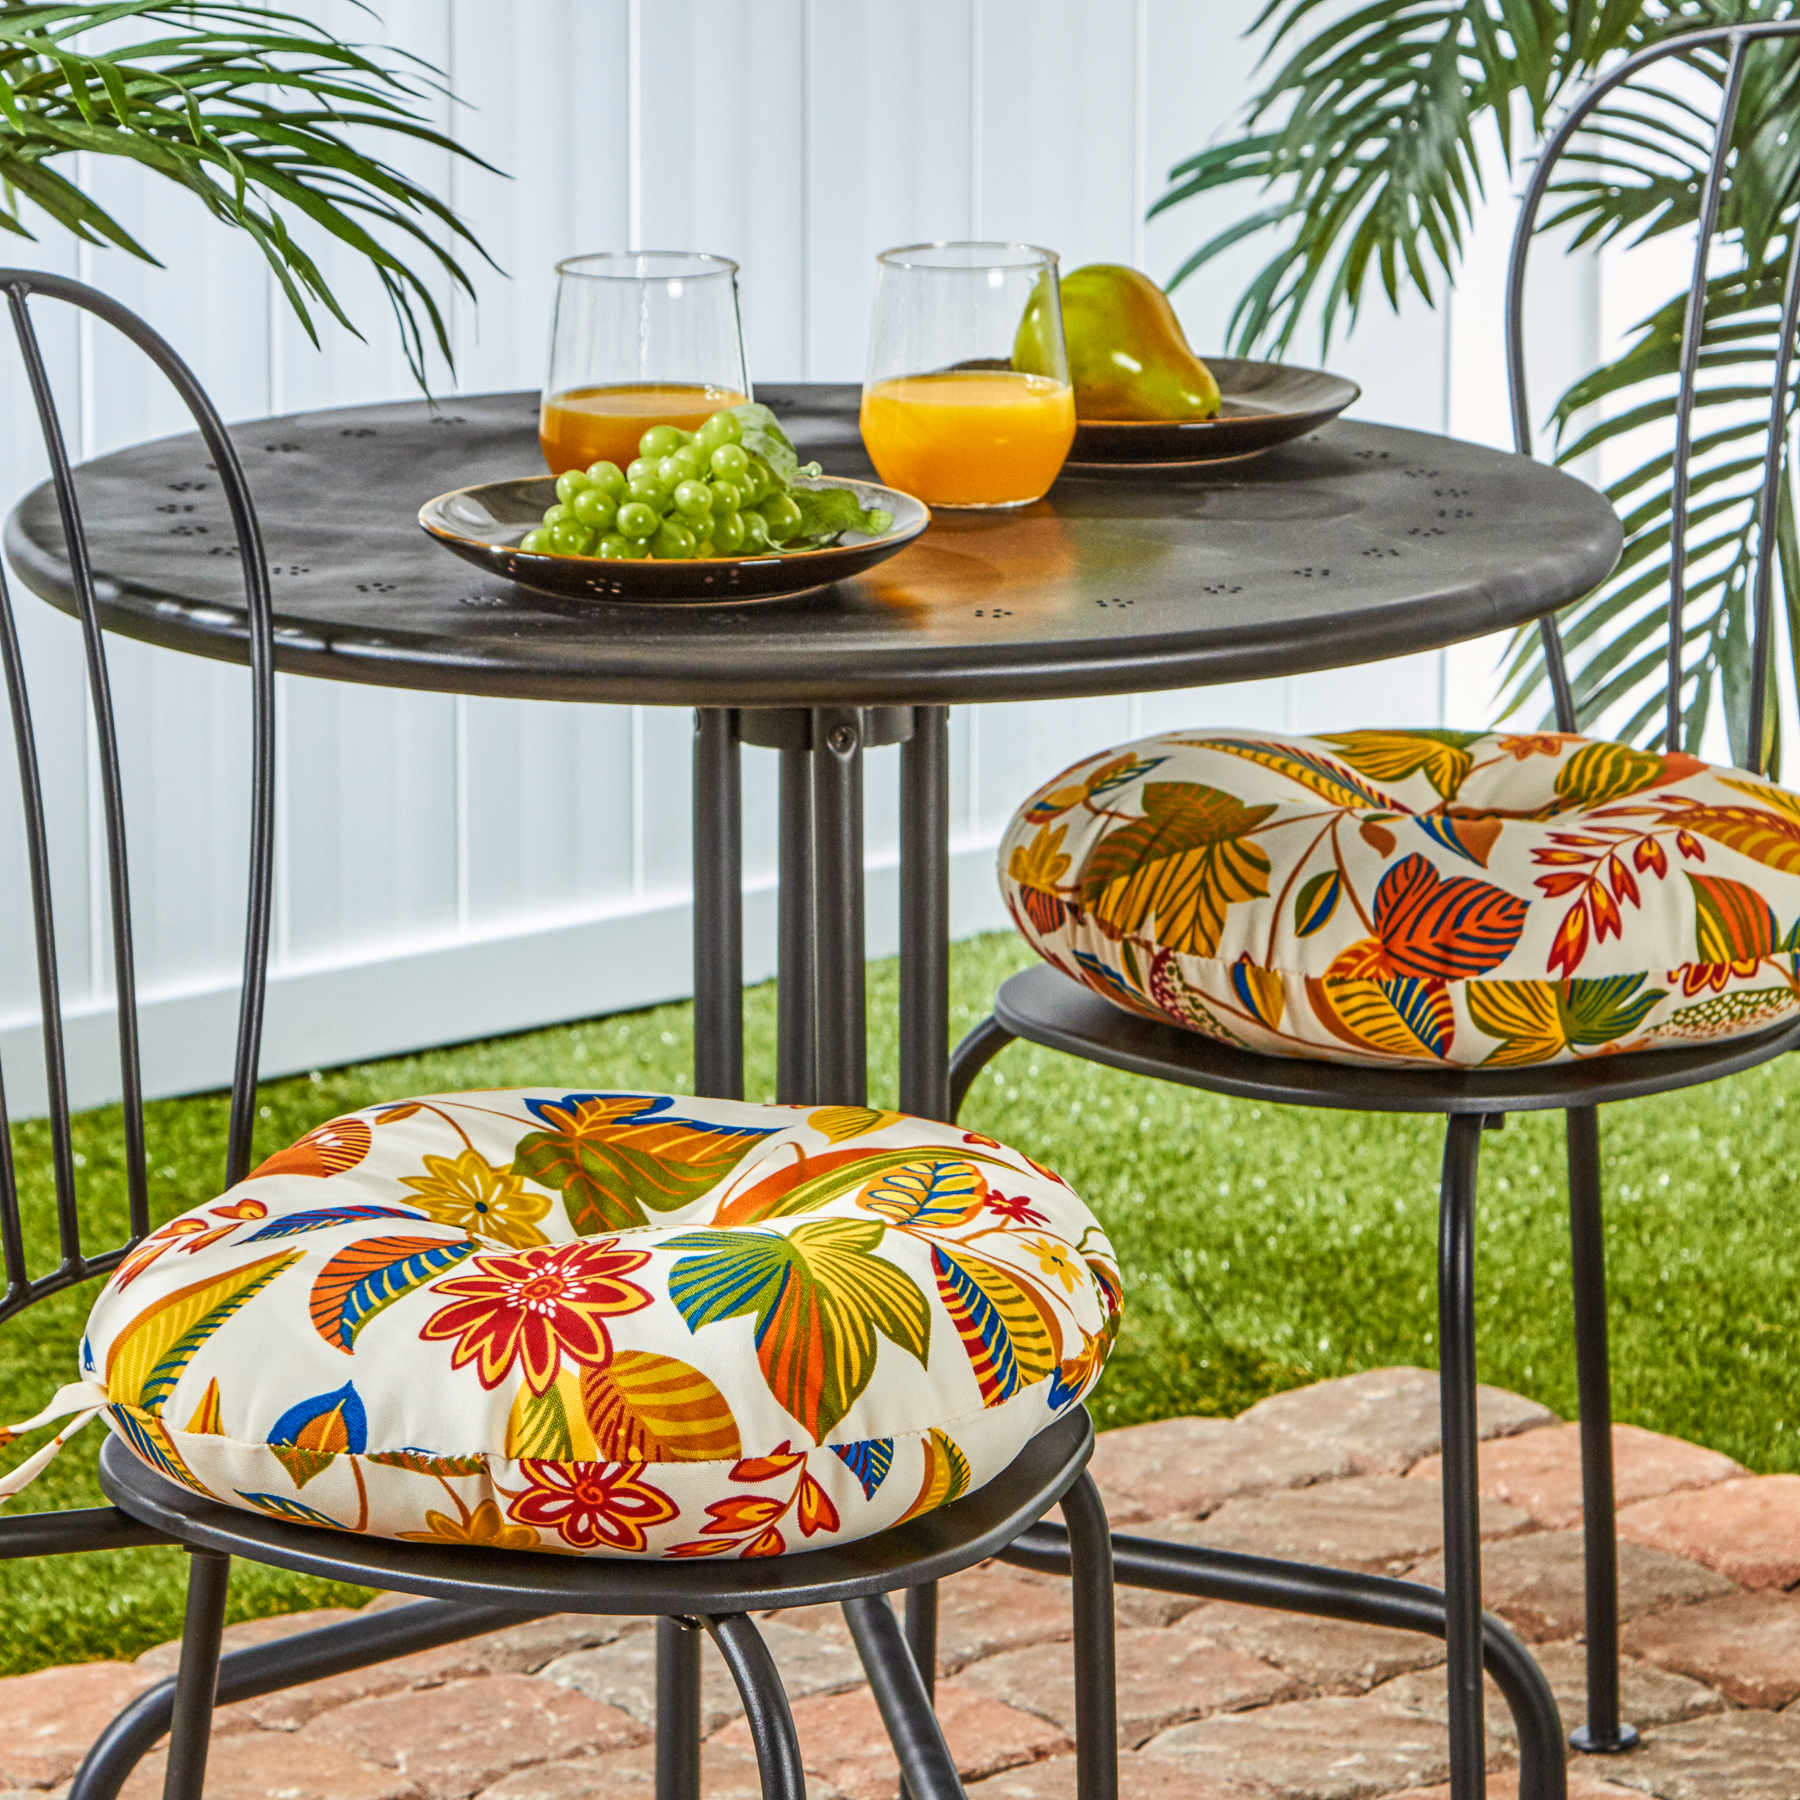 Greendale Home Fashions Esprit Floral 15 in. Round Outdoor Reversible Bistro Seat Cushion (Set of 2) - image 3 of 6